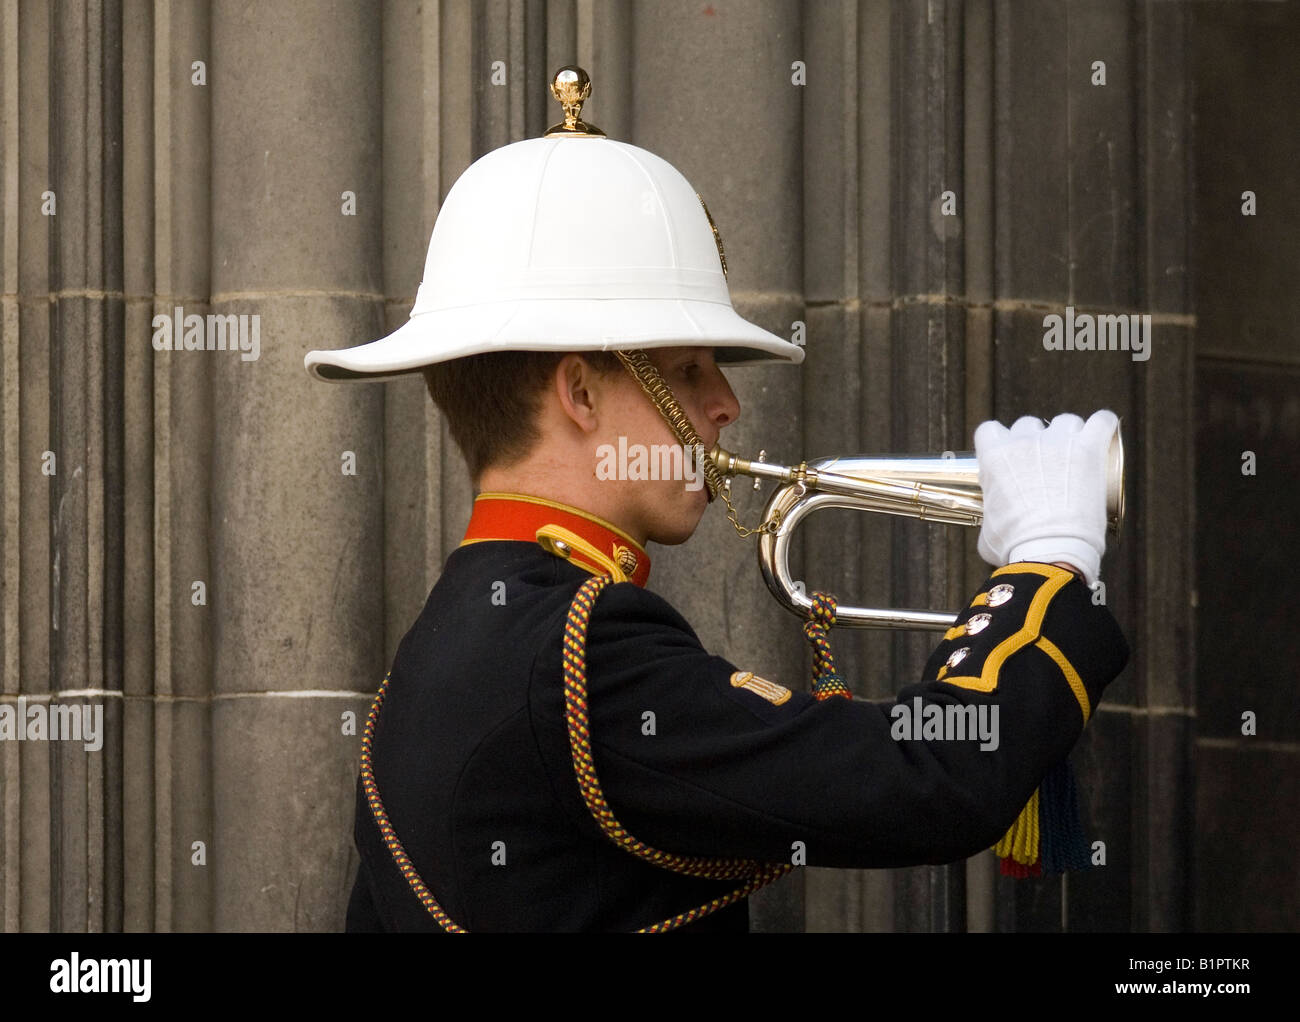 A bugler from the Royal Regiment Of Scotland plays the Last Stand on a military bugle outside St Giles' Cathedral in Edinburgh. Stock Photo